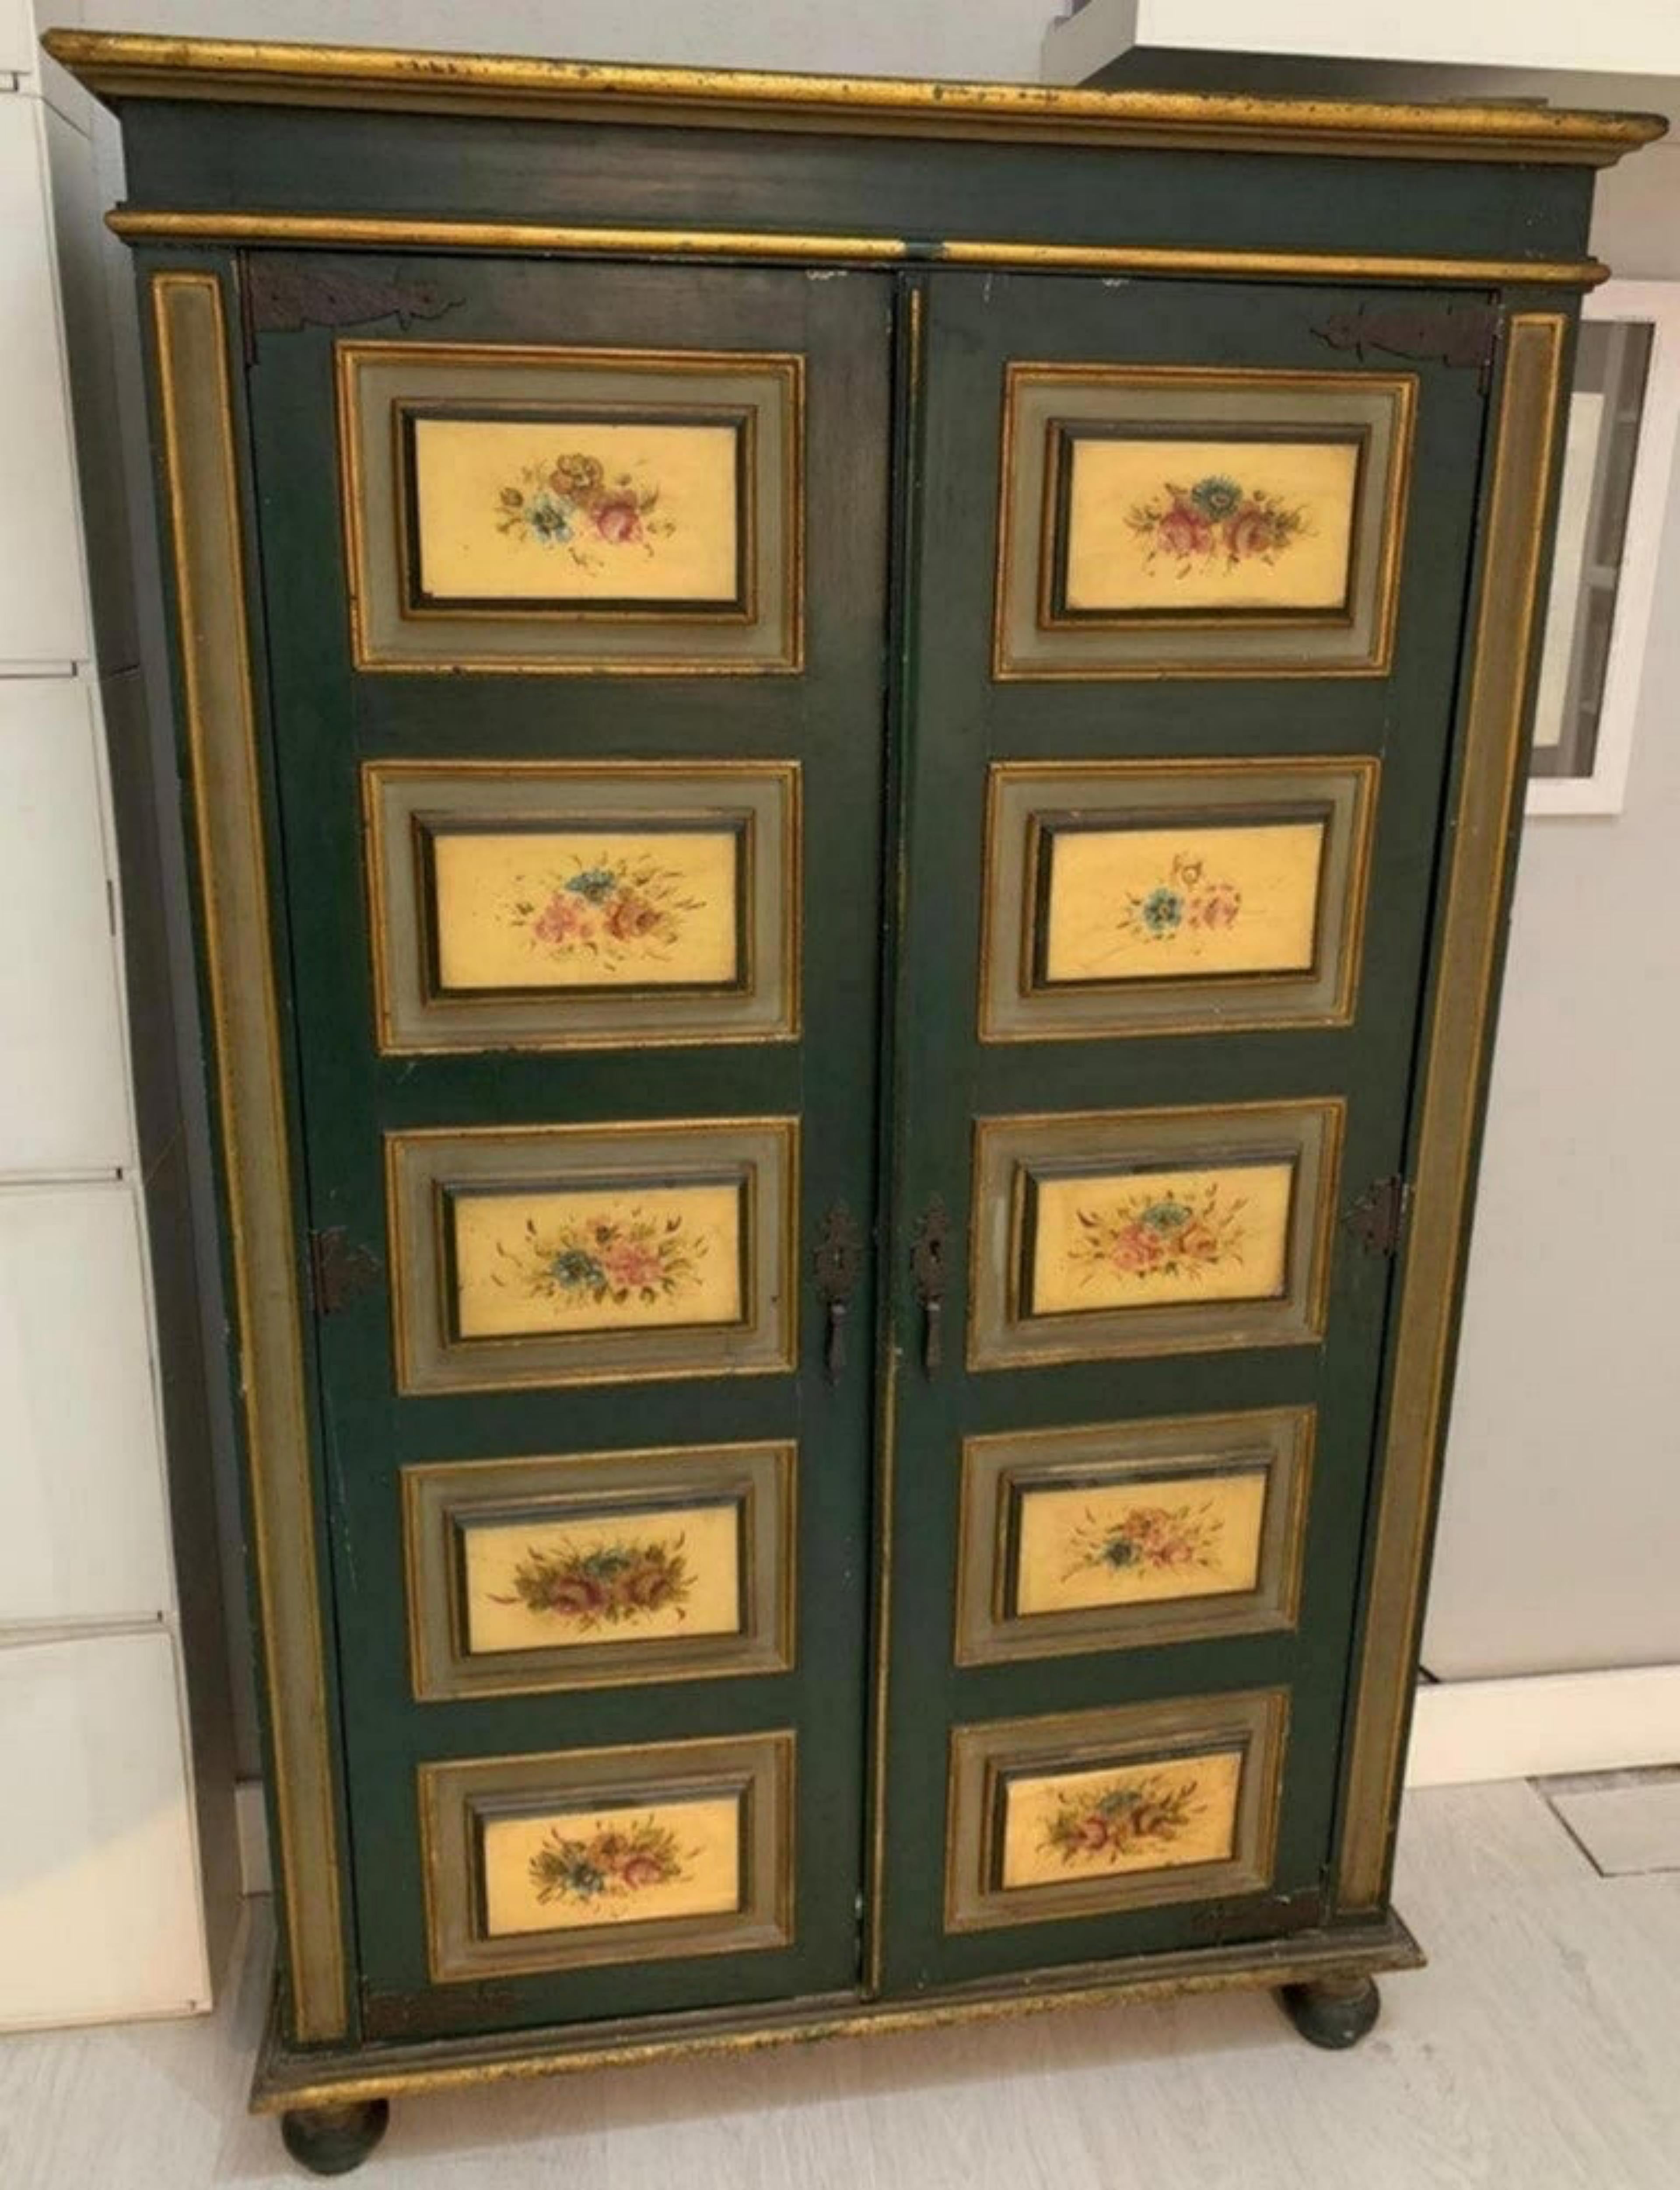 Title: French Provençal wardrobe
Date/Period: XX century
Dimension: 153cm x 97cm x 33cm.
Materials: Wood, painted
Additional information: beginning of the 20th century (1900-1930) all original on the outside, restored on the inside.

